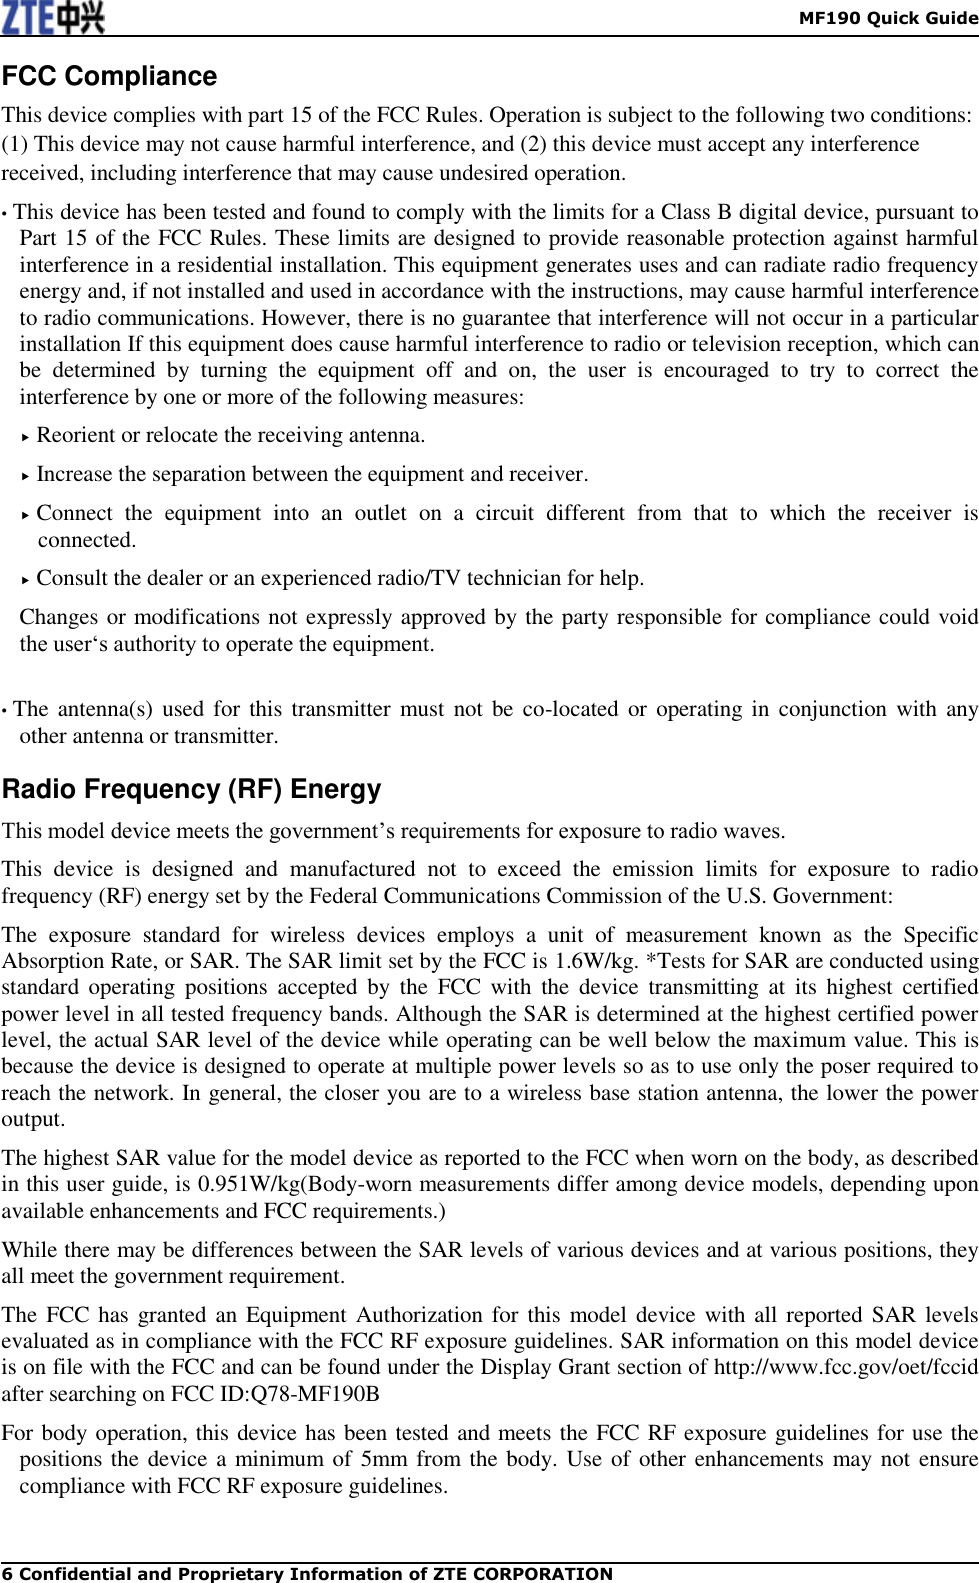    MF190 Quick Guide 6 Confidential and Proprietary Information of ZTE CORPORATION FCC Compliance This device complies with part 15 of the FCC Rules. Operation is subject to the following two conditions: (1) This device may not cause harmful interference, and (2) this device must accept any interference received, including interference that may cause undesired operation. • This device has been tested and found to comply with the limits for a Class B digital device, pursuant to Part 15 of the FCC Rules. These limits are designed to provide reasonable protection against harmful interference in a residential installation. This equipment generates uses and can radiate radio frequency energy and, if not installed and used in accordance with the instructions, may cause harmful interference to radio communications. However, there is no guarantee that interference will not occur in a particular installation If this equipment does cause harmful interference to radio or television reception, which can be  determined  by  turning  the  equipment  off  and  on,  the  user  is  encouraged  to  try  to  correct  the interference by one or more of the following measures:  Reorient or relocate the receiving antenna.  Increase the separation between the equipment and receiver.  Connect  the  equipment  into  an  outlet  on  a  circuit  different  from  that  to  which  the  receiver  is connected.  Consult the dealer or an experienced radio/TV technician for help. Changes or modifications not expressly approved by the party responsible for compliance could void the user‘s authority to operate the equipment.  • The antenna(s)  used for this  transmitter must  not be co-located or  operating in conjunction with  any other antenna or transmitter. Radio Frequency (RF) Energy This model device meets the government’s requirements for exposure to radio waves. This  device  is  designed  and  manufactured  not  to  exceed  the  emission  limits  for  exposure  to  radio frequency (RF) energy set by the Federal Communications Commission of the U.S. Government: The  exposure  standard  for  wireless  devices  employs  a  unit  of  measurement  known  as  the  Specific Absorption Rate, or SAR. The SAR limit set by the FCC is 1.6W/kg. *Tests for SAR are conducted using standard  operating  positions  accepted  by  the  FCC  with  the  device  transmitting  at  its  highest  certified power level in all tested frequency bands. Although the SAR is determined at the highest certified power level, the actual SAR level of the device while operating can be well below the maximum value. This is because the device is designed to operate at multiple power levels so as to use only the poser required to reach the network. In general, the closer you are to a wireless base station antenna, the lower the power output. The highest SAR value for the model device as reported to the FCC when worn on the body, as described in this user guide, is 0.951W/kg(Body-worn measurements differ among device models, depending upon available enhancements and FCC requirements.) While there may be differences between the SAR levels of various devices and at various positions, they all meet the government requirement. The FCC has  granted an Equipment Authorization for this  model device with all reported SAR levels evaluated as in compliance with the FCC RF exposure guidelines. SAR information on this model device is on file with the FCC and can be found under the Display Grant section of http://www.fcc.gov/oet/fccid after searching on FCC ID:Q78-MF190B For body operation, this device has been tested and meets the FCC RF exposure guidelines for use the positions the device a minimum of  5mm from the body. Use of other enhancements may not ensure compliance with FCC RF exposure guidelines.  